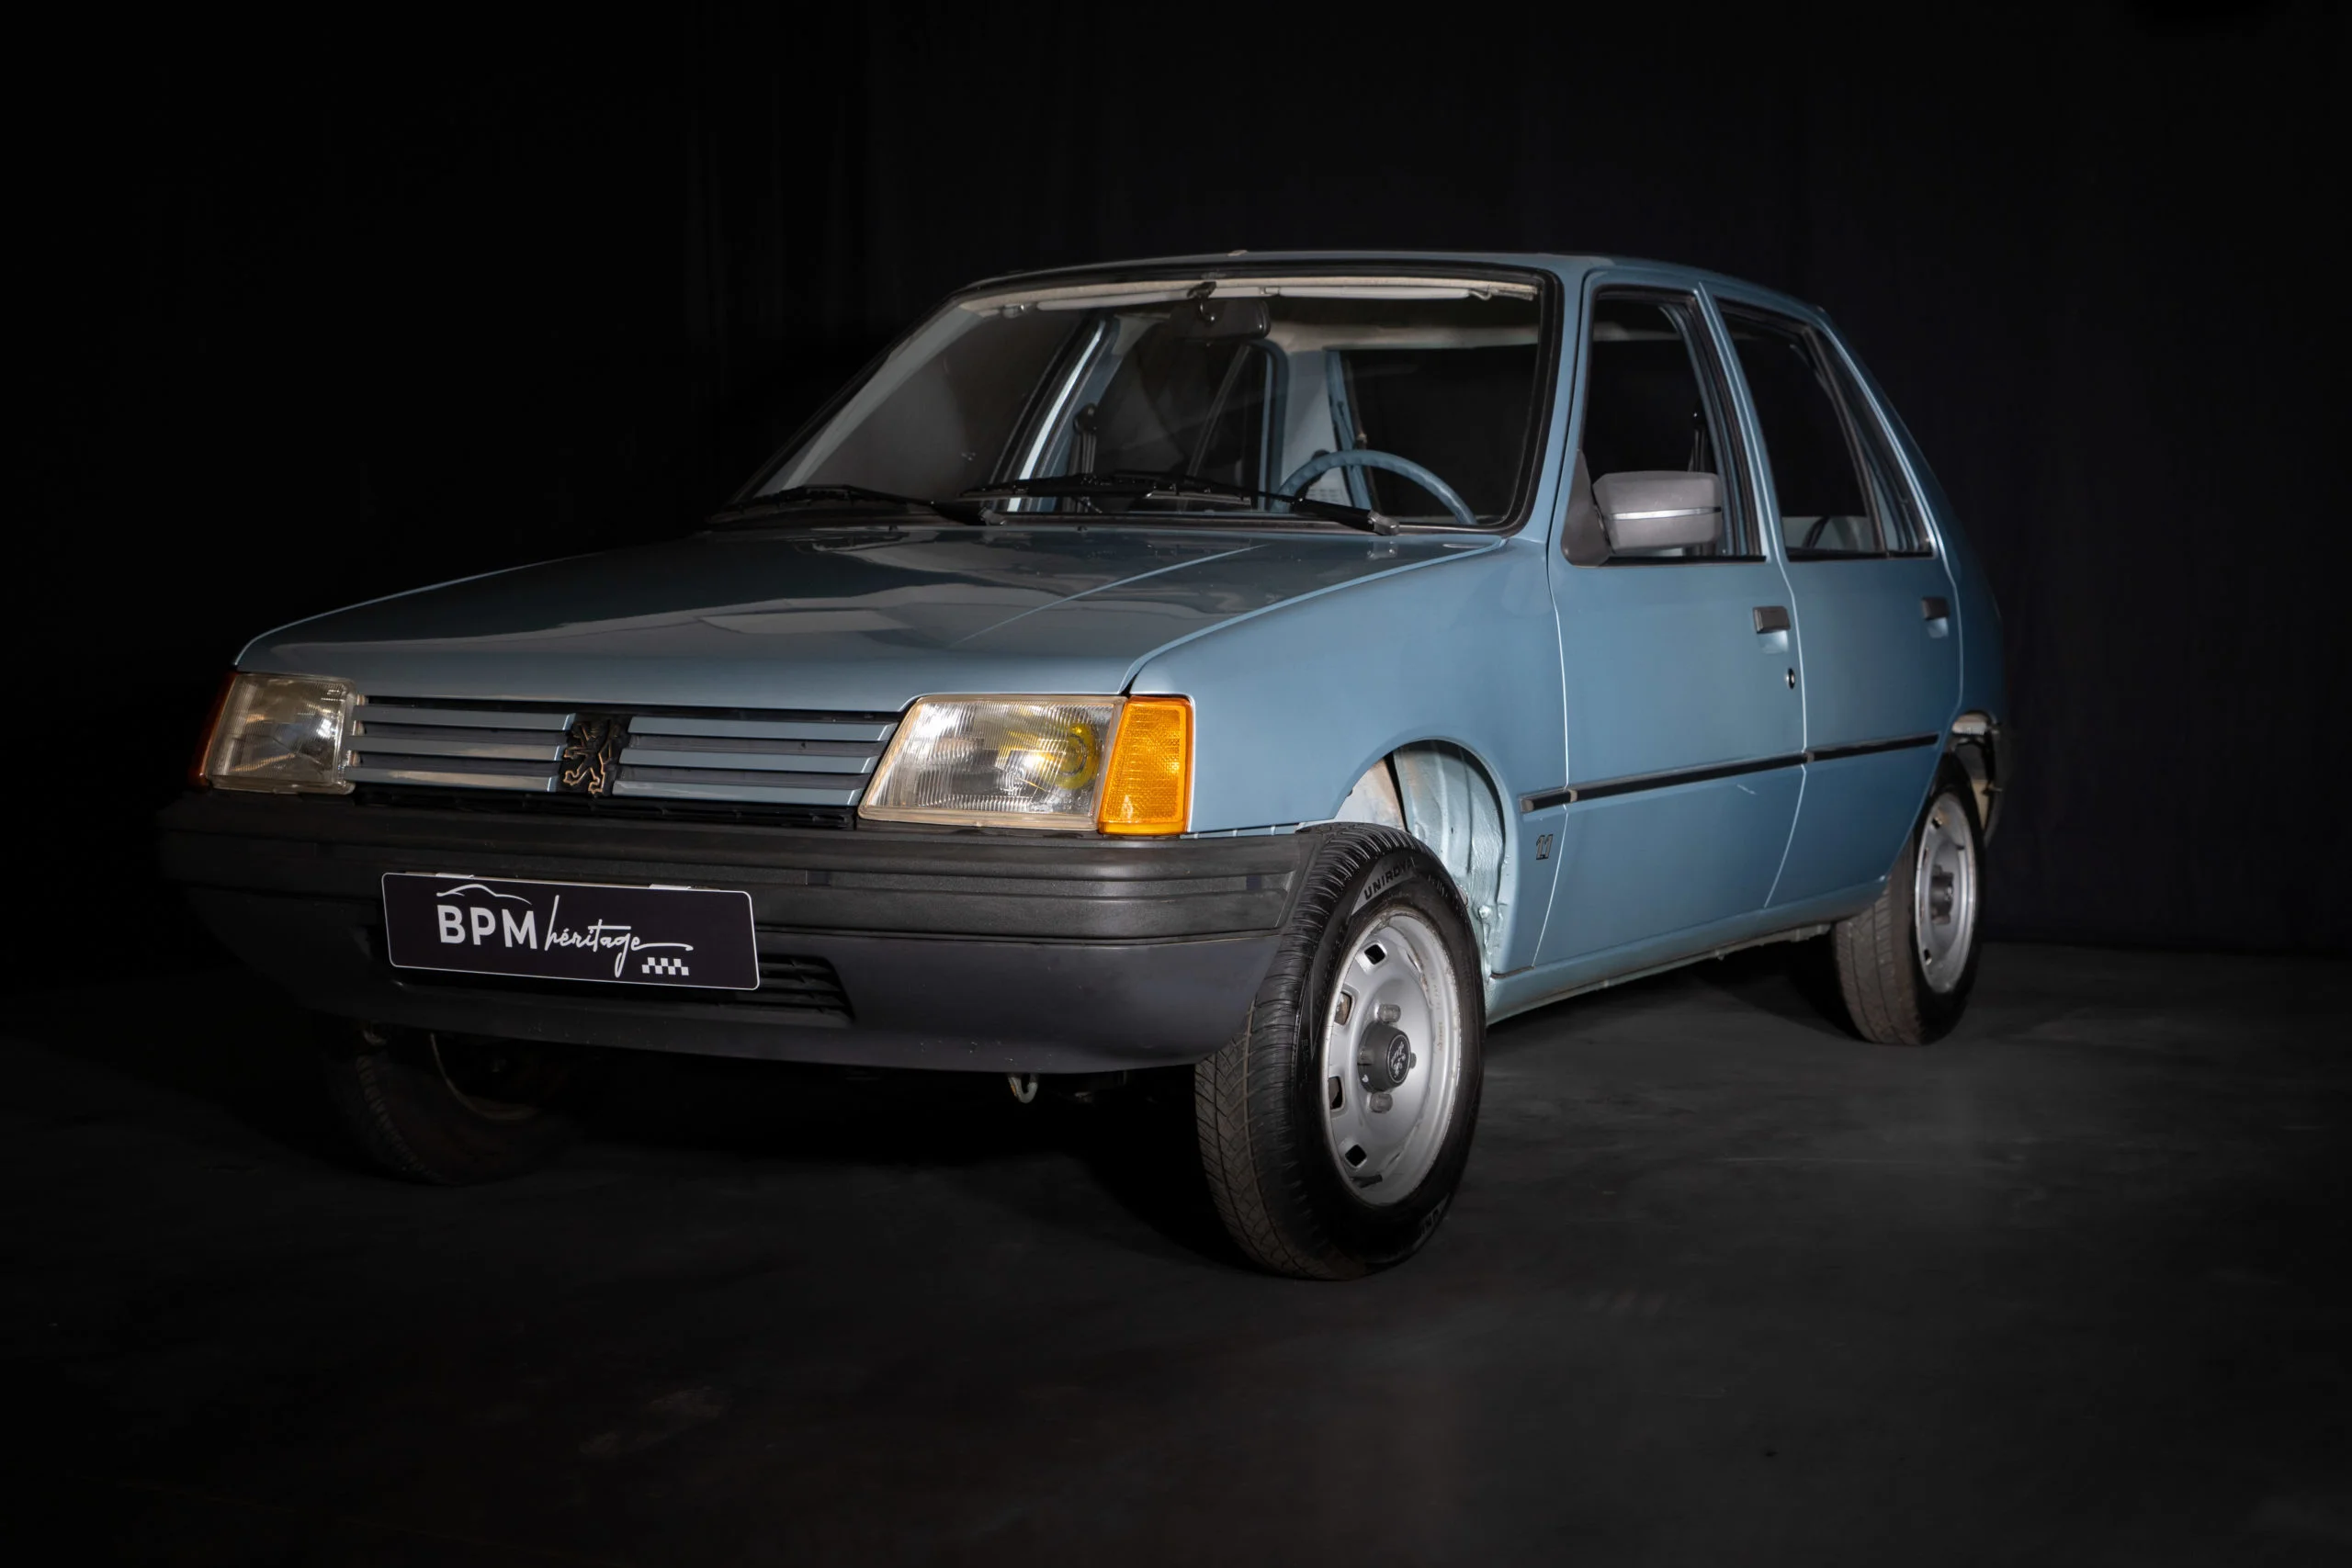 Cars - PCX87 - 0506 - 1984 Peugeot 205 in Metallic Light Blue high quality  plastic</i> Photo is pre-production sample, final product may vary</i>